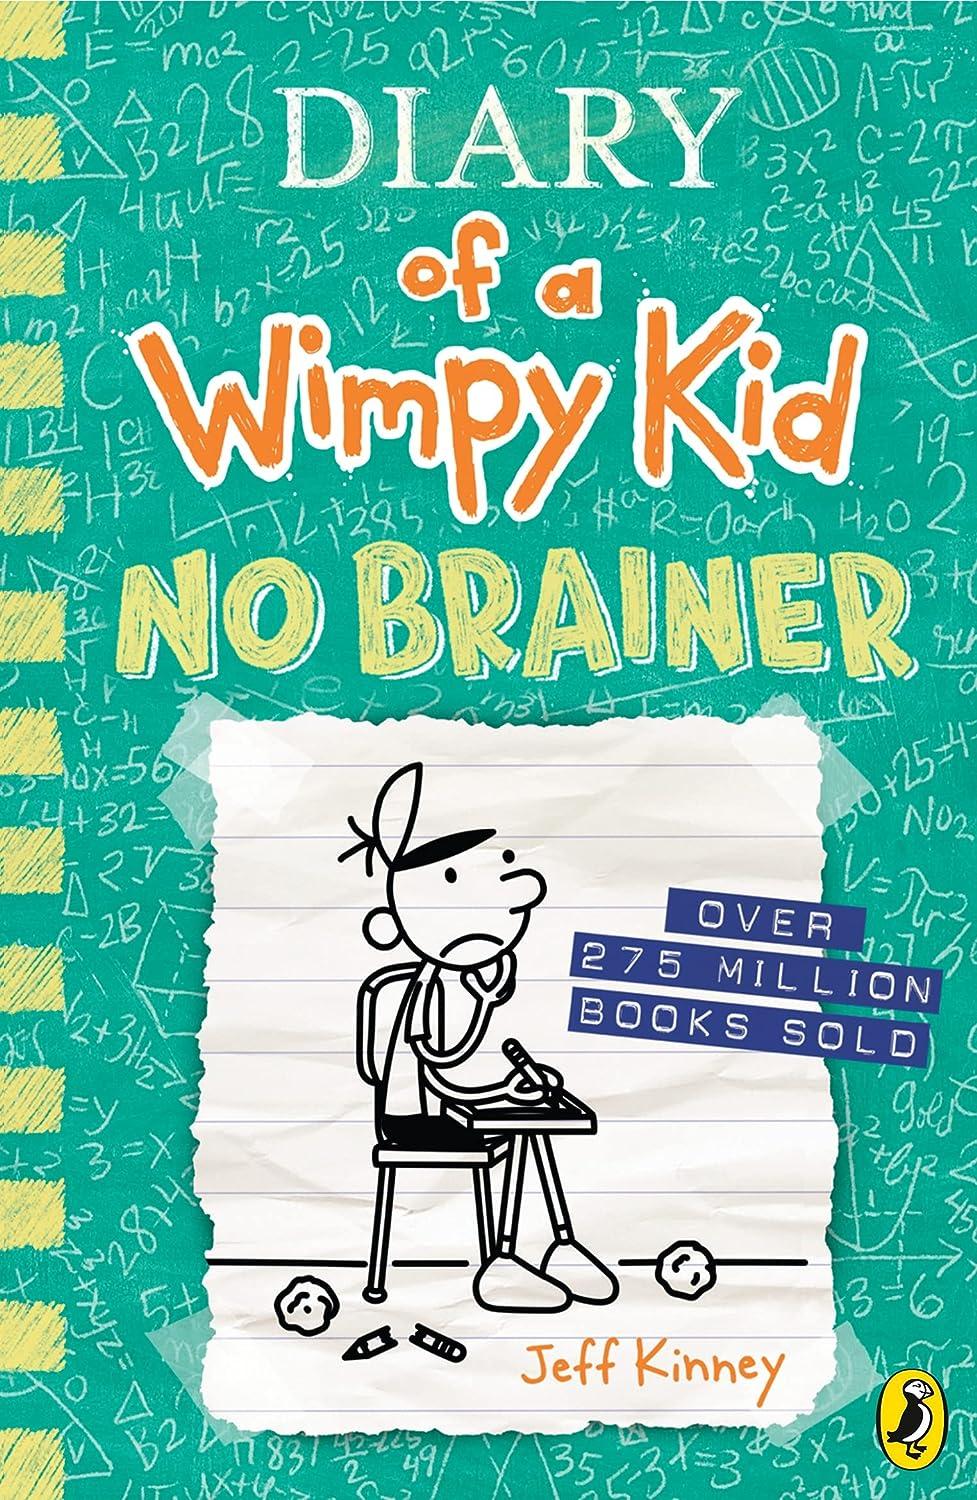 No Brainer (Diary of a Wimpy Kid, 